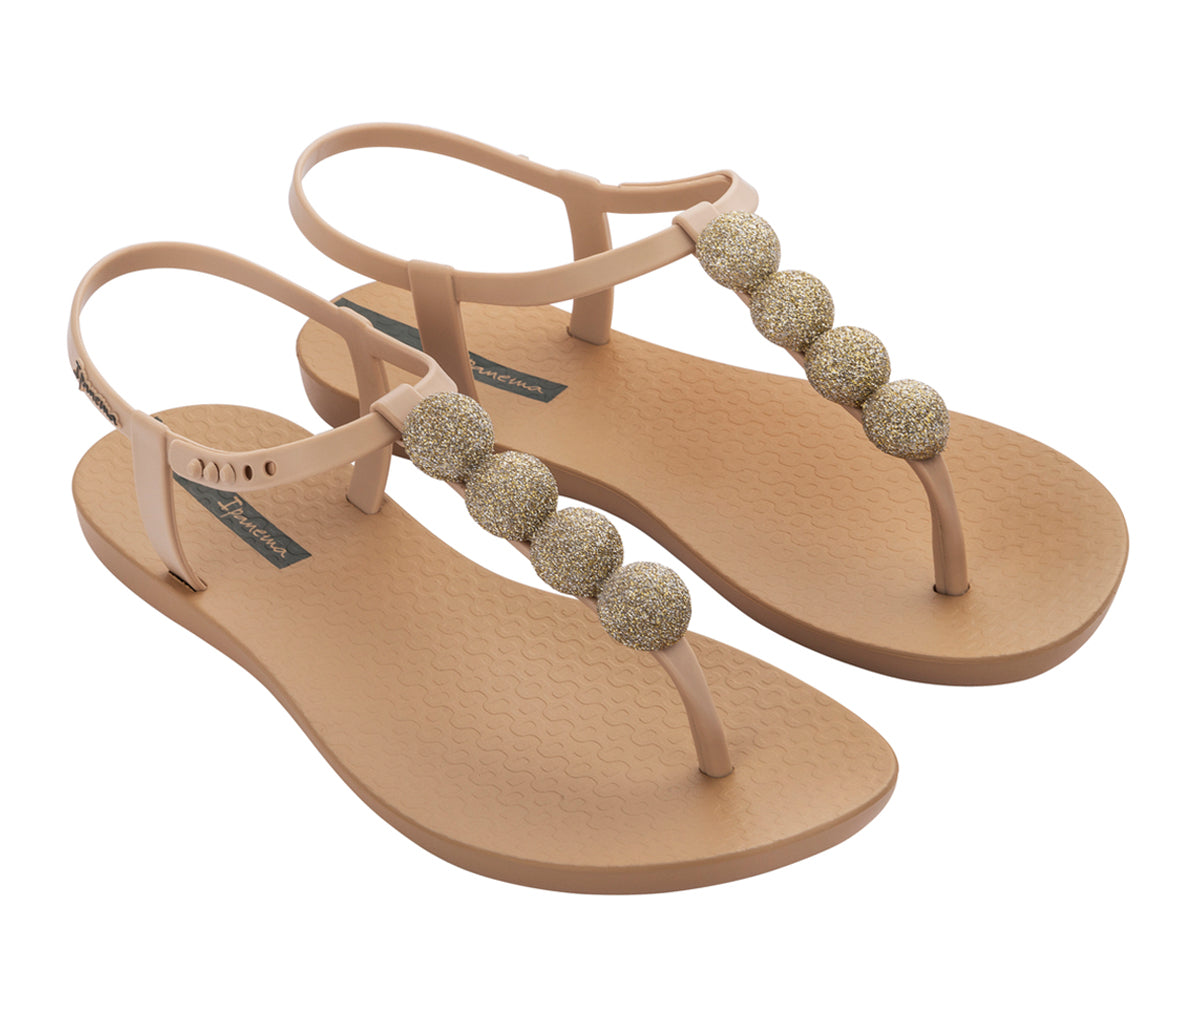 Angled view of a pair of beige Ipanema Disco sandals with straps and 4 glitter balls on top strap.